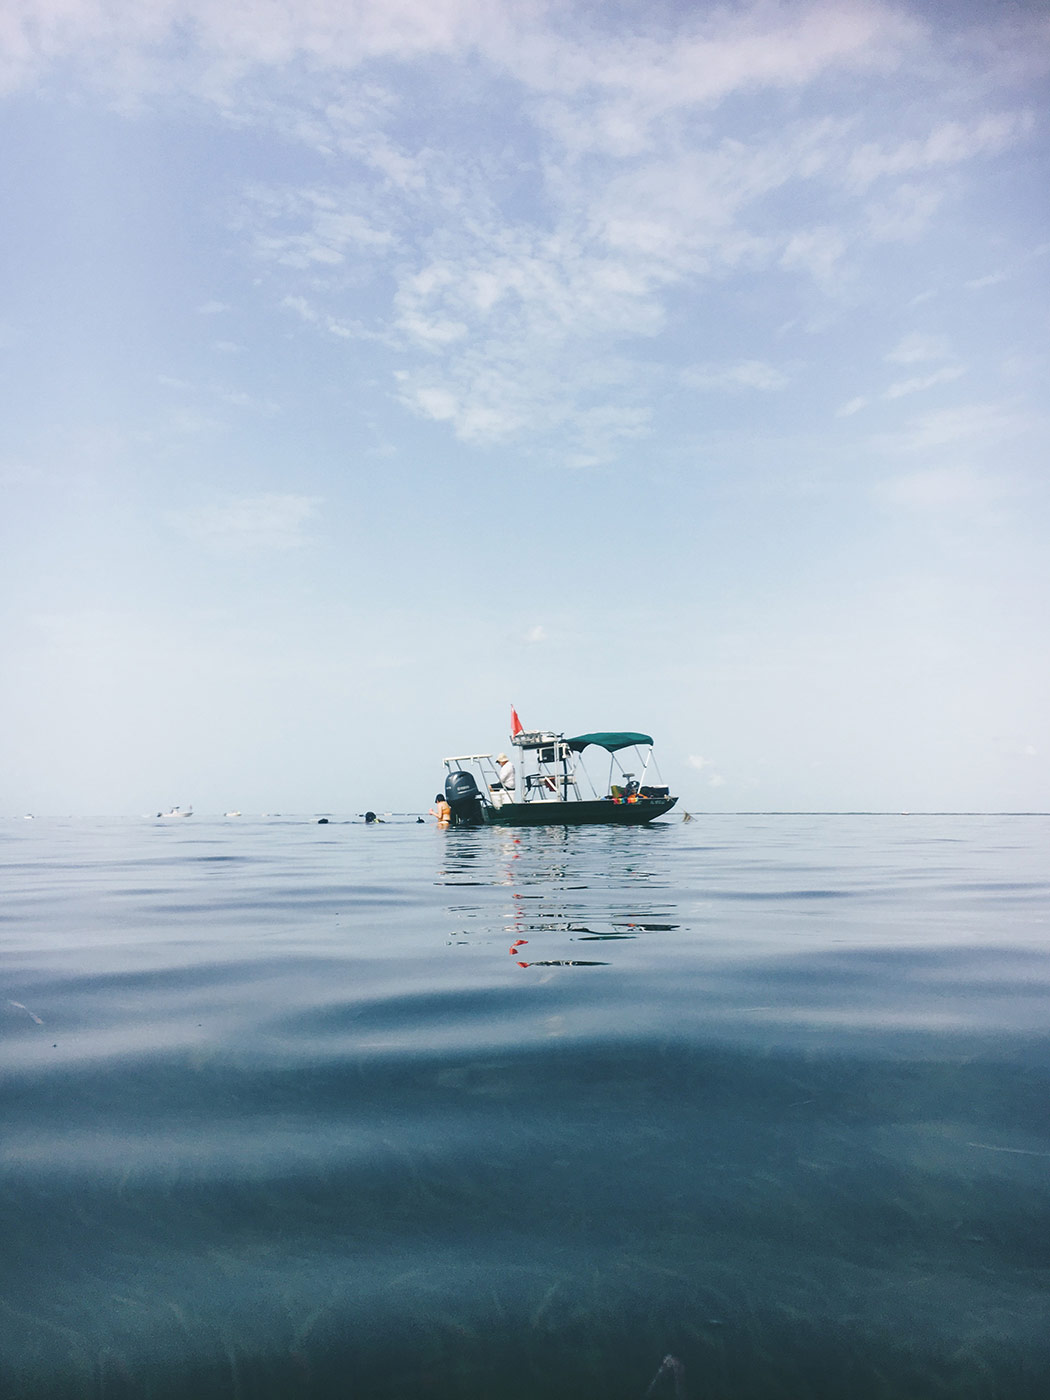 A day along the Gulf Coast with Rabbit Hole. A small boat sits on still blue water. Blue hazy sky is in the background.